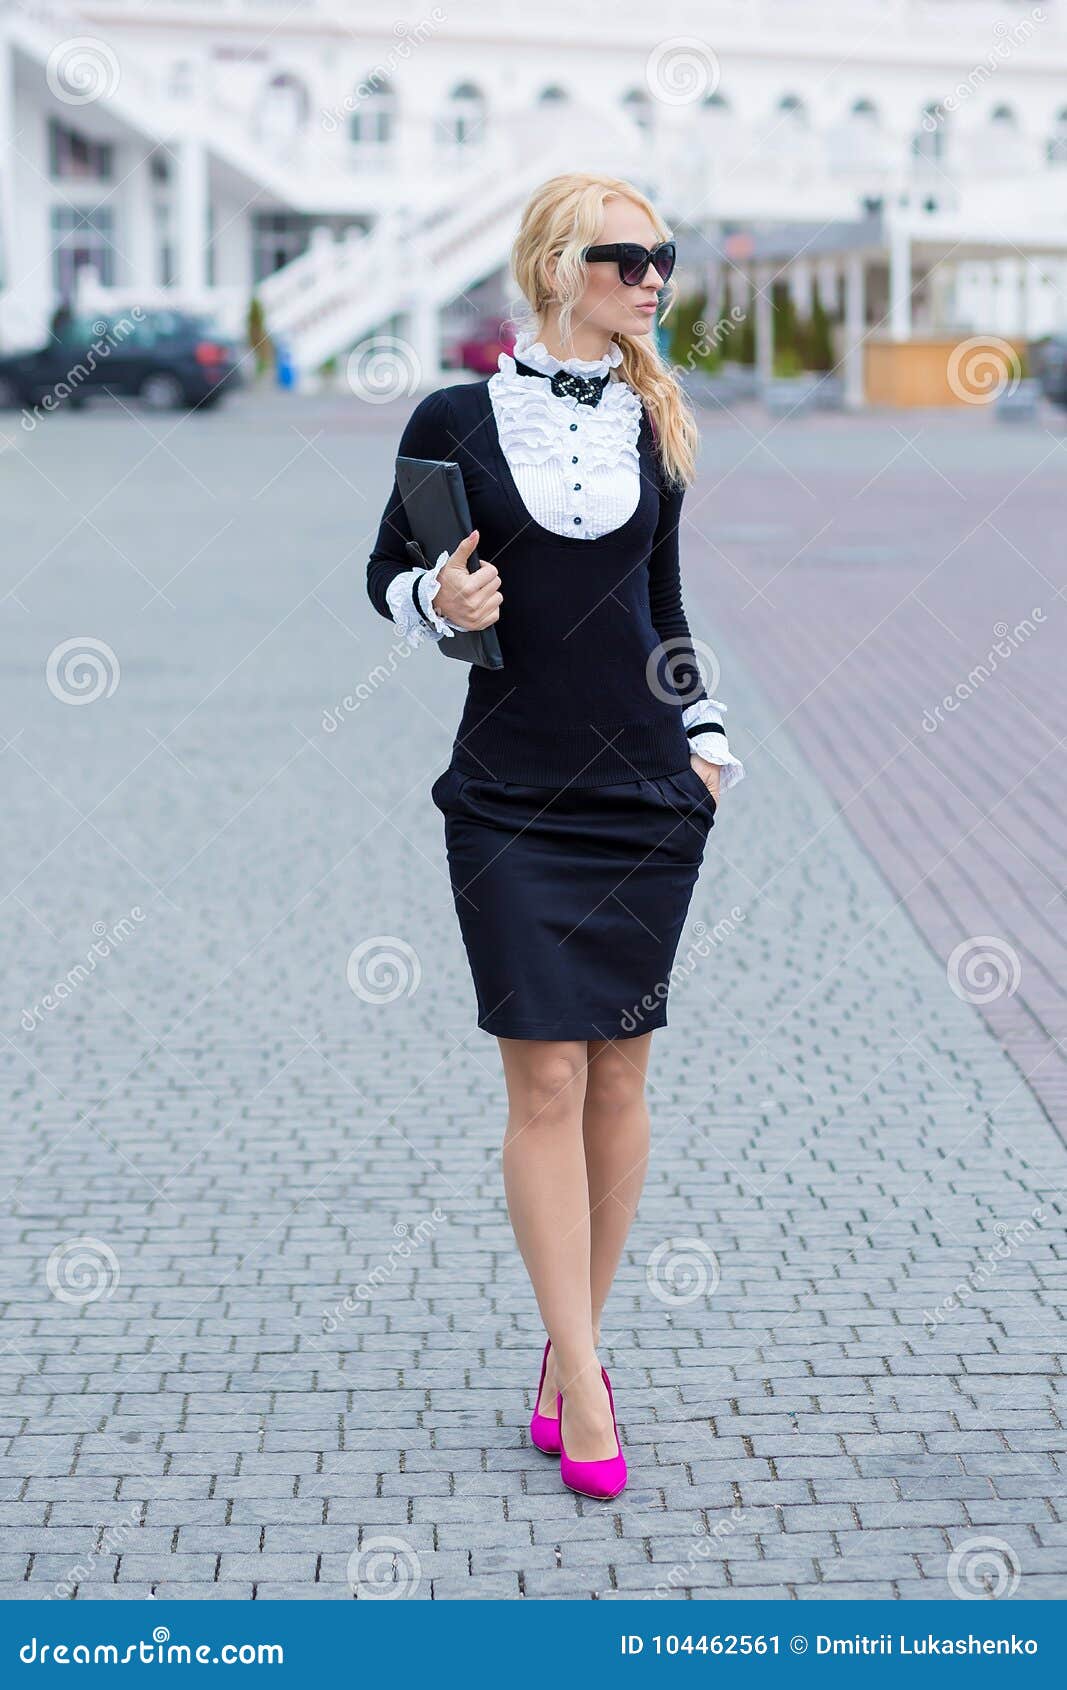 Business Lady Woman Dressed in Working Serious Skirt and Shirt Posing on Street with Note Book Blond Hairs and Pink High Heels Sex Stock Image